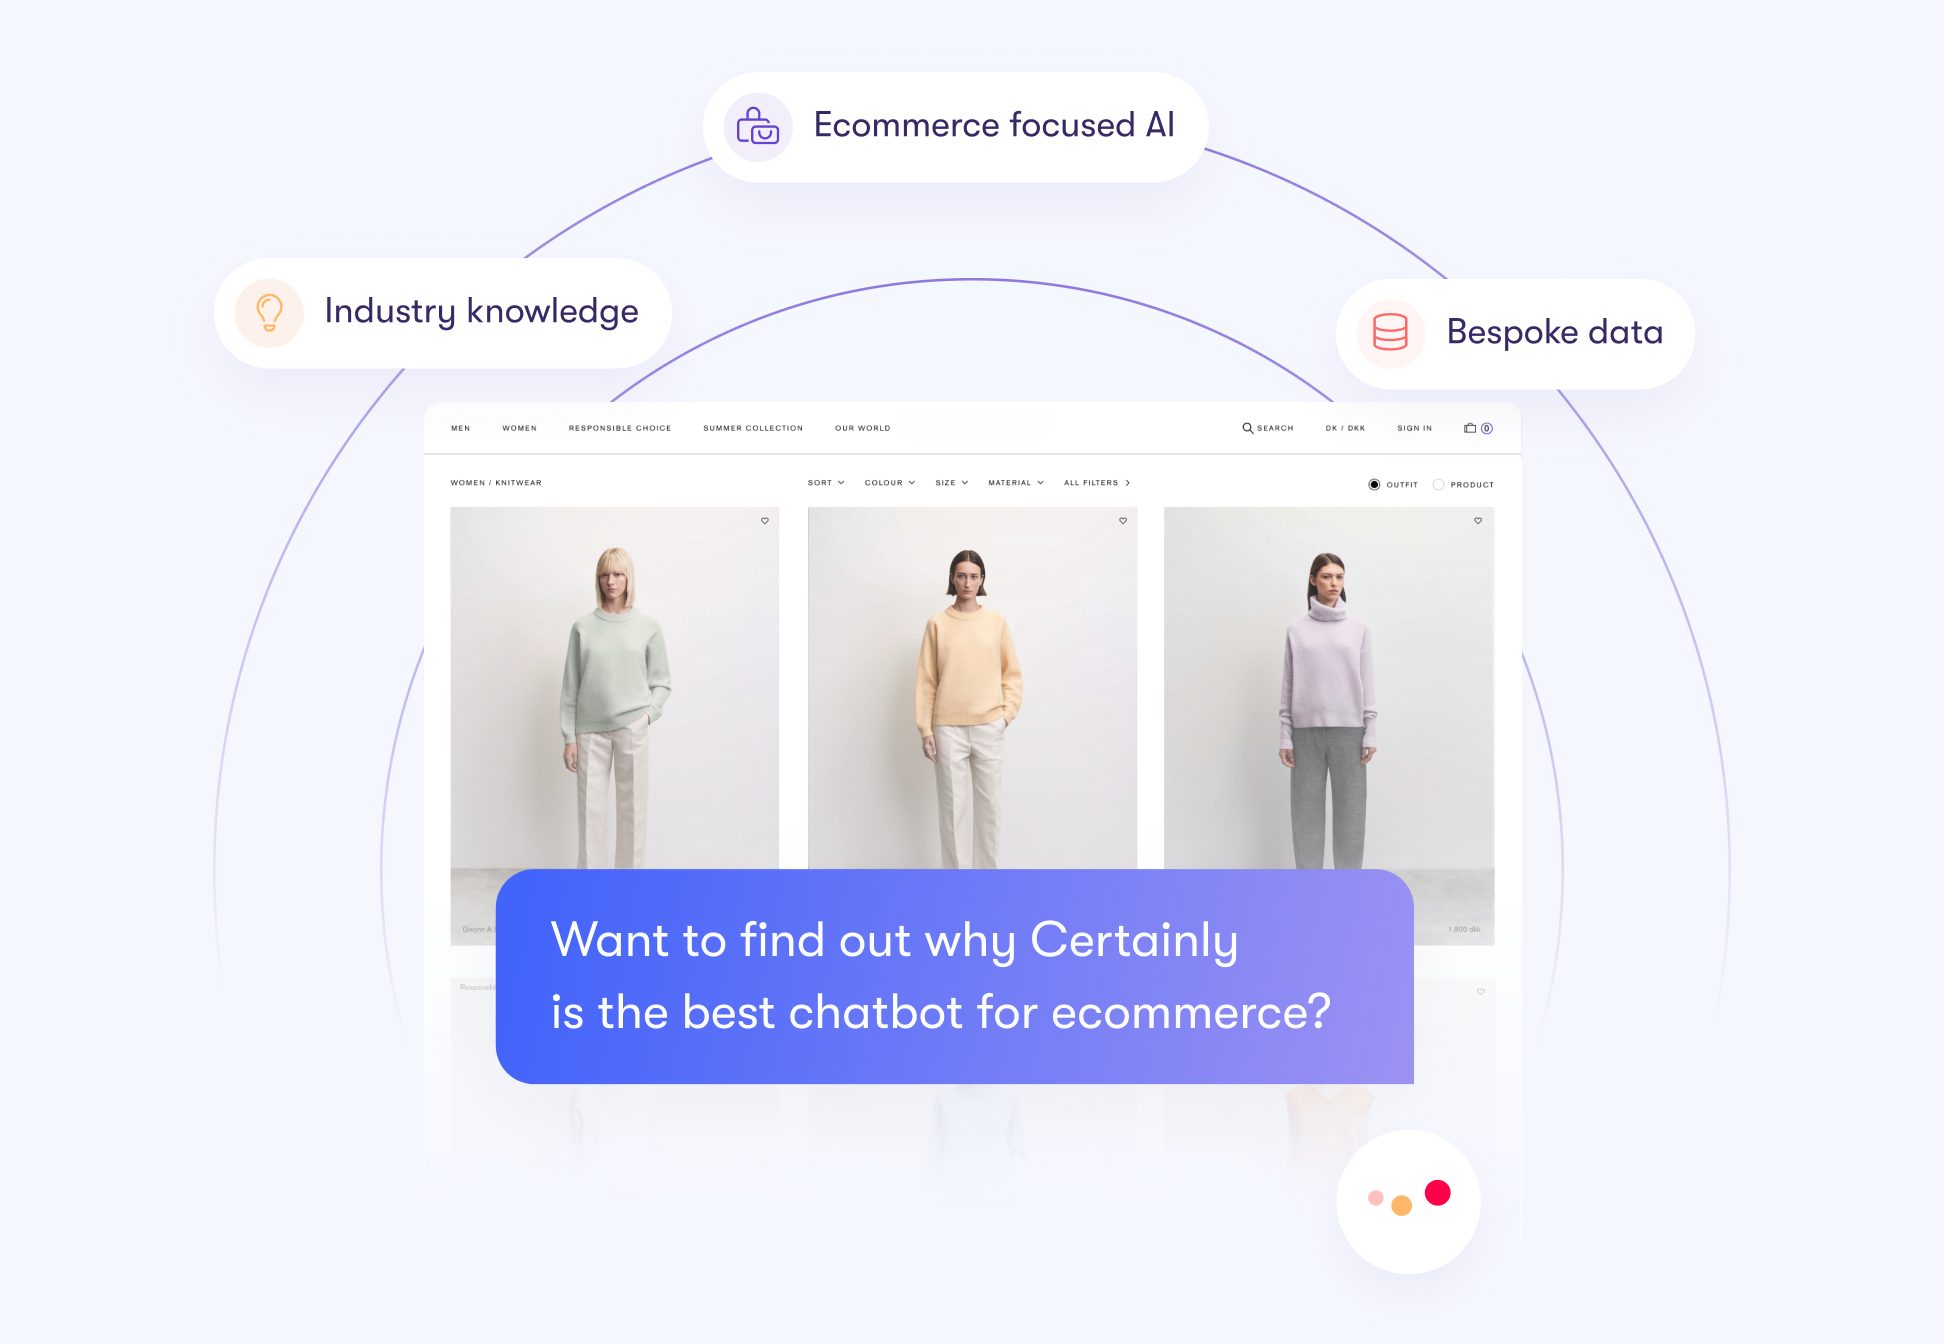 A Certainly chatbot asking "Want to find out why Certainly is the best chatbot for ecommerce?" over a screenshot of an ecommerce store page. The words "Industry knowledge", "ecommerce focused AI", and "Bespoke data" float around it.